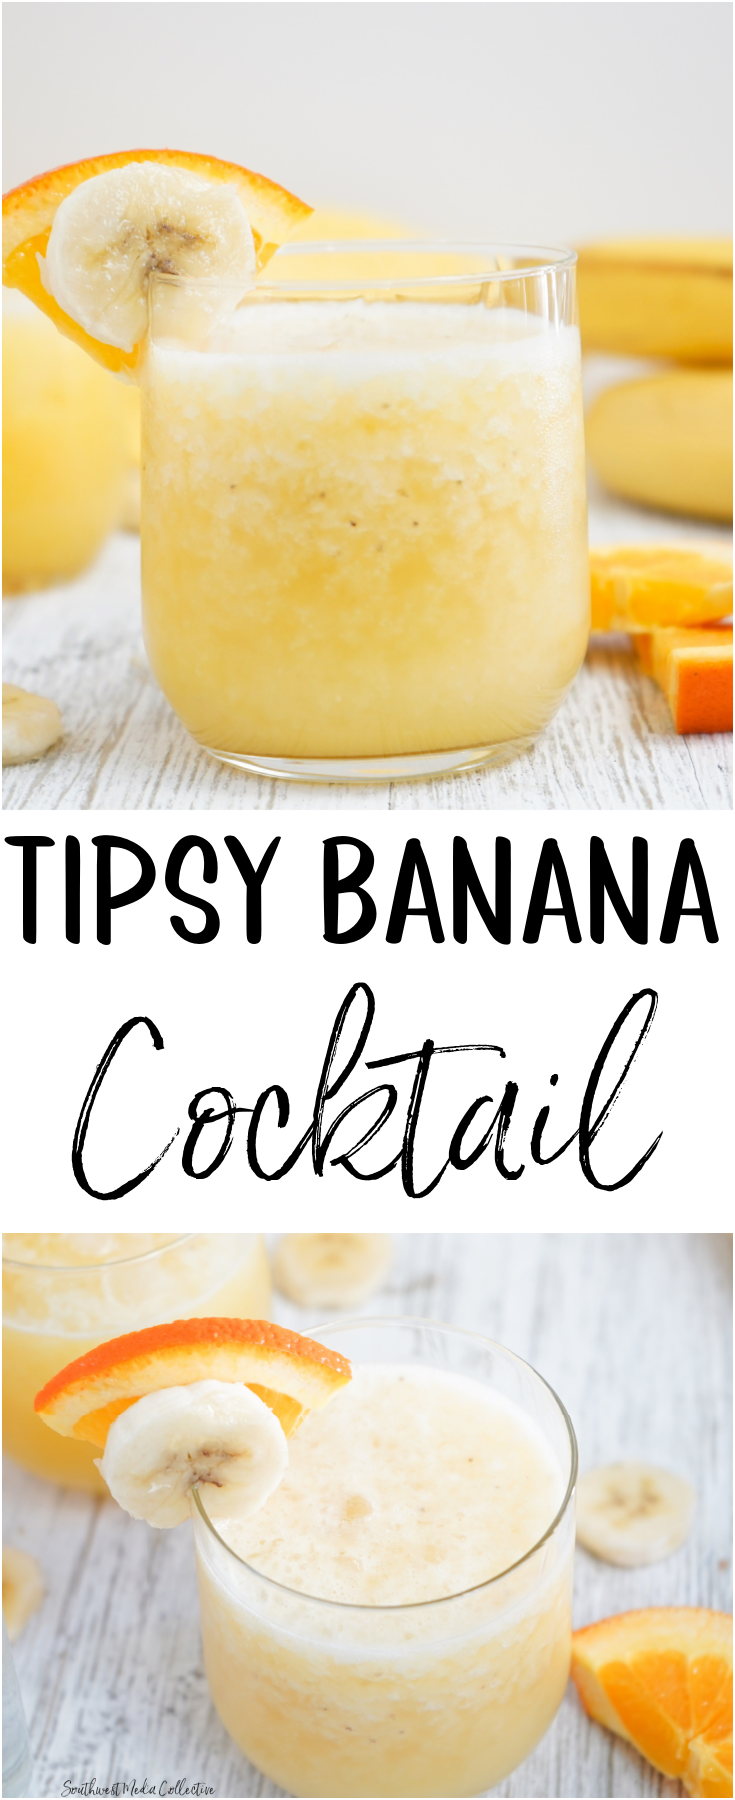 Tipsy Banana Cocktail made with 4 ingredients that come together with ice for a bright and cheery cocktail to bring on warmer weather!